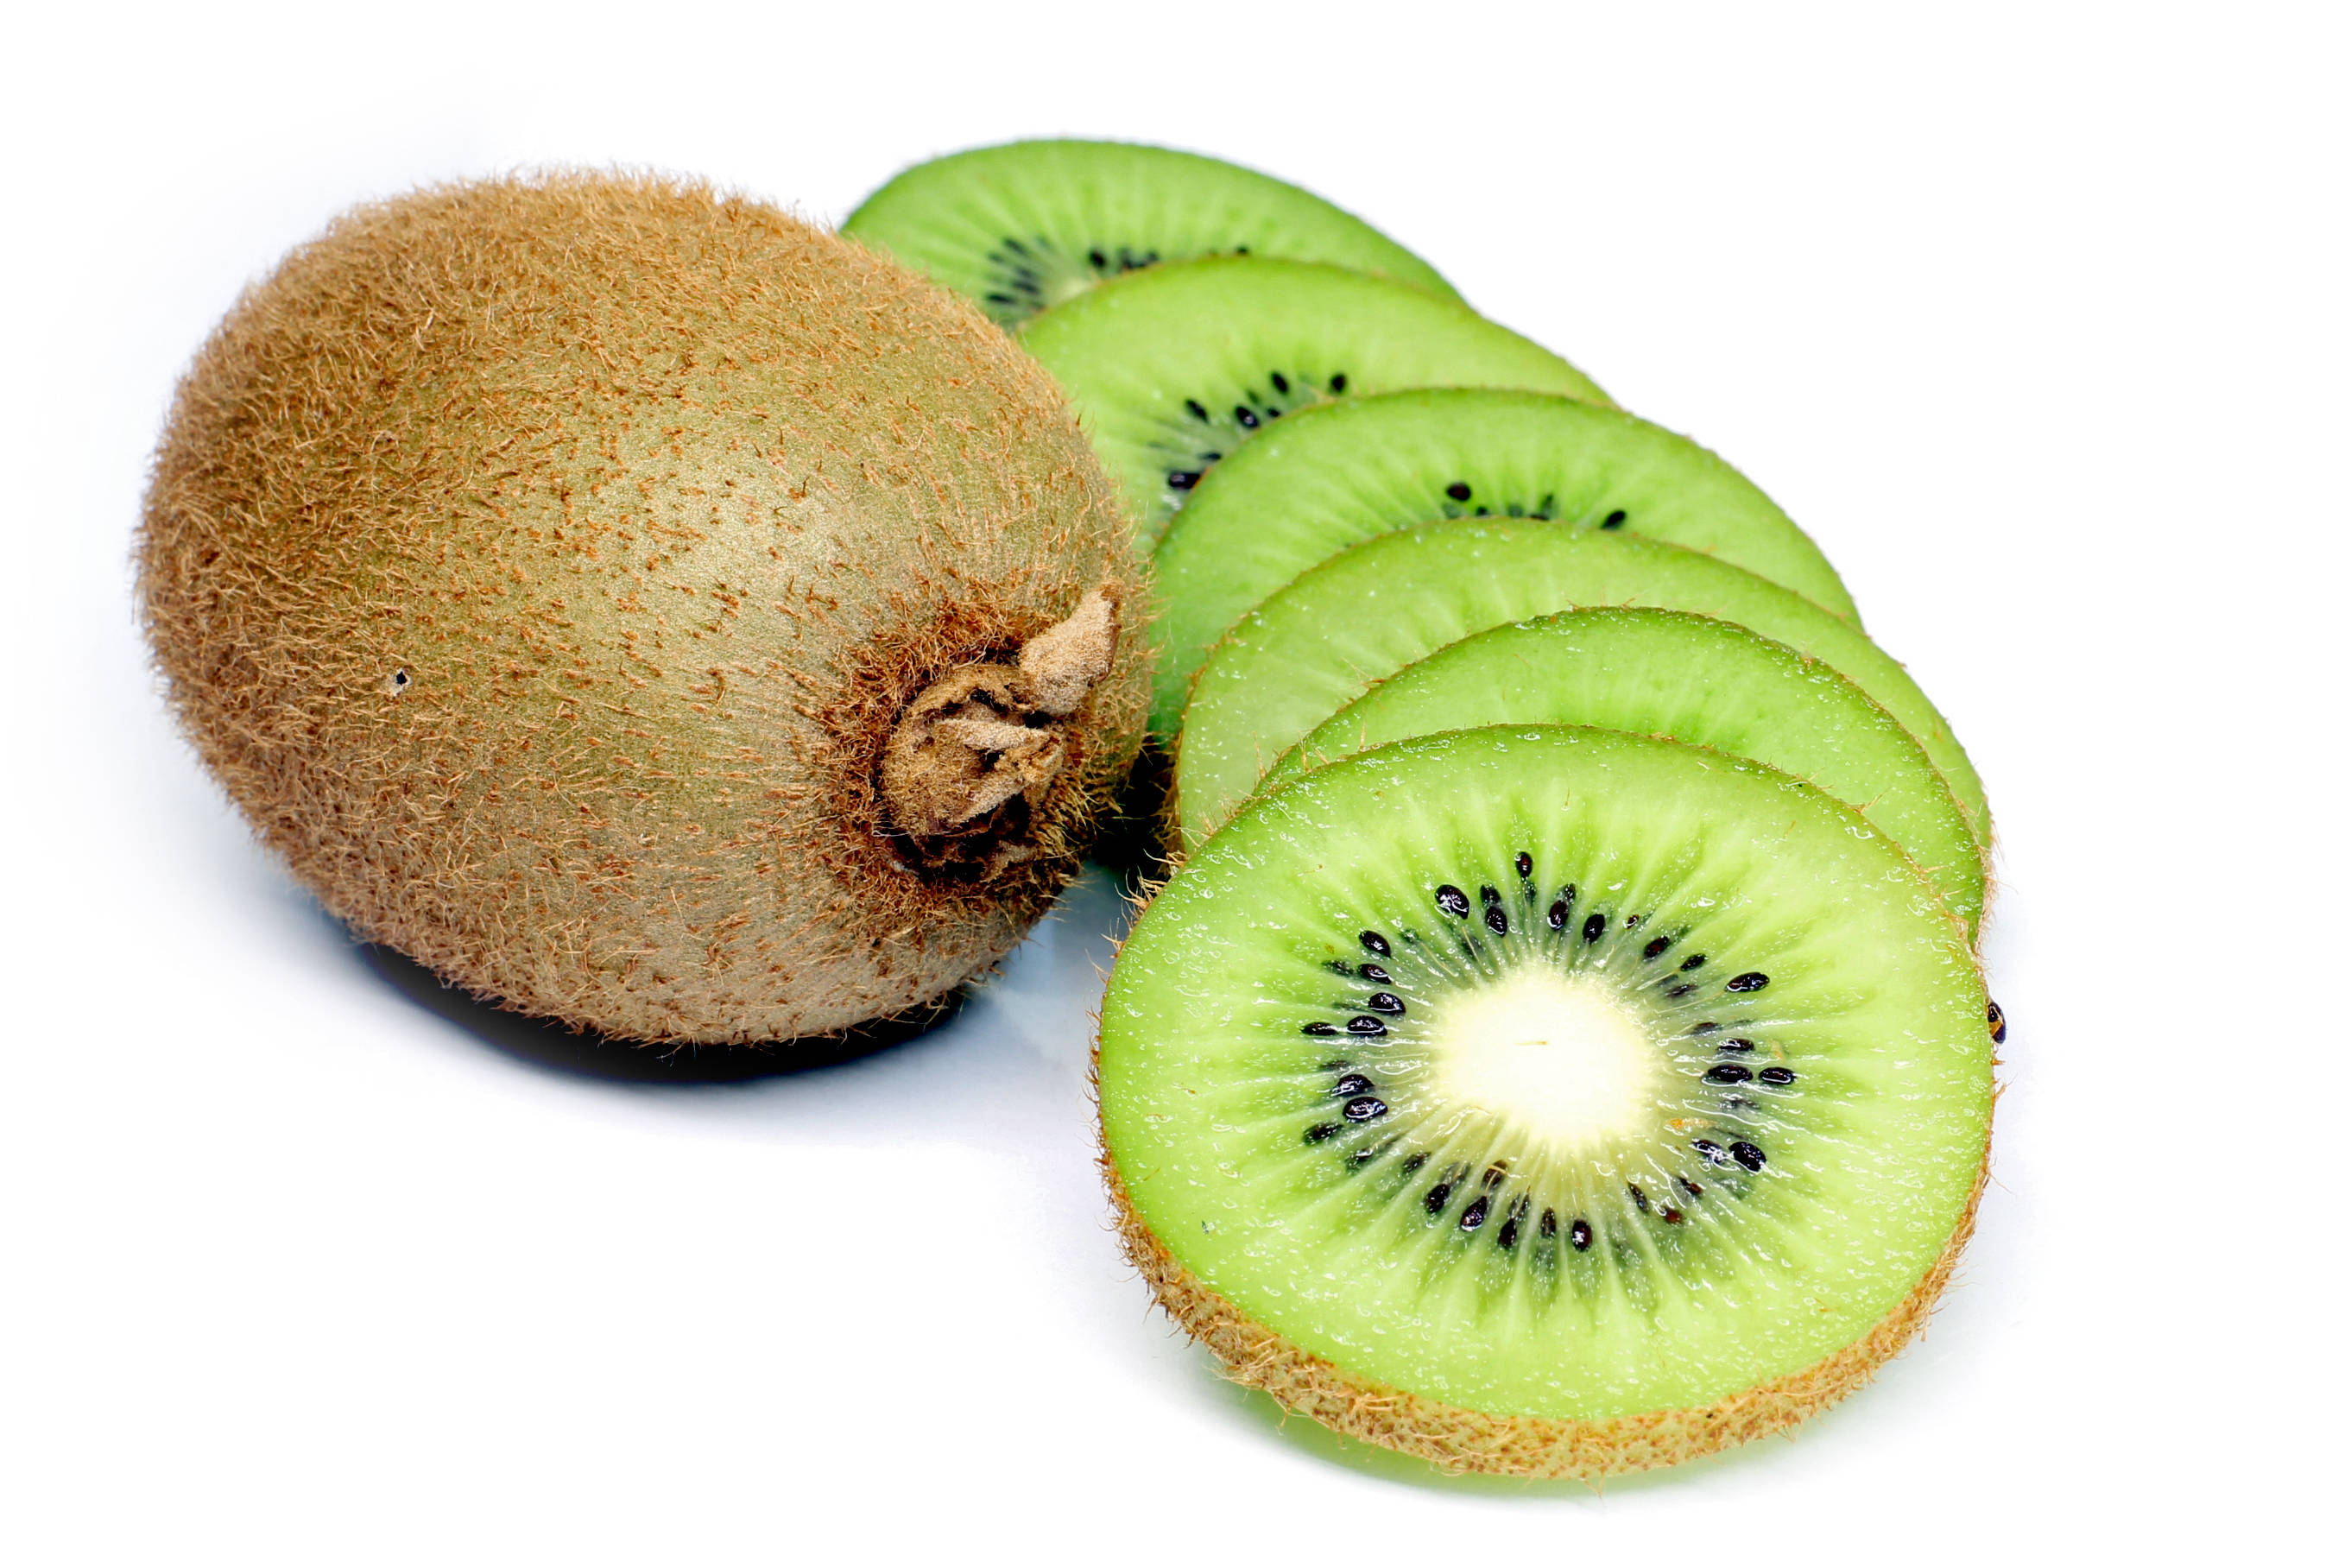 Appetizing Fruit Photography Of A Whole Kiwi Beside A Series Of Kiwi Slices Laid On Top Of Each Other